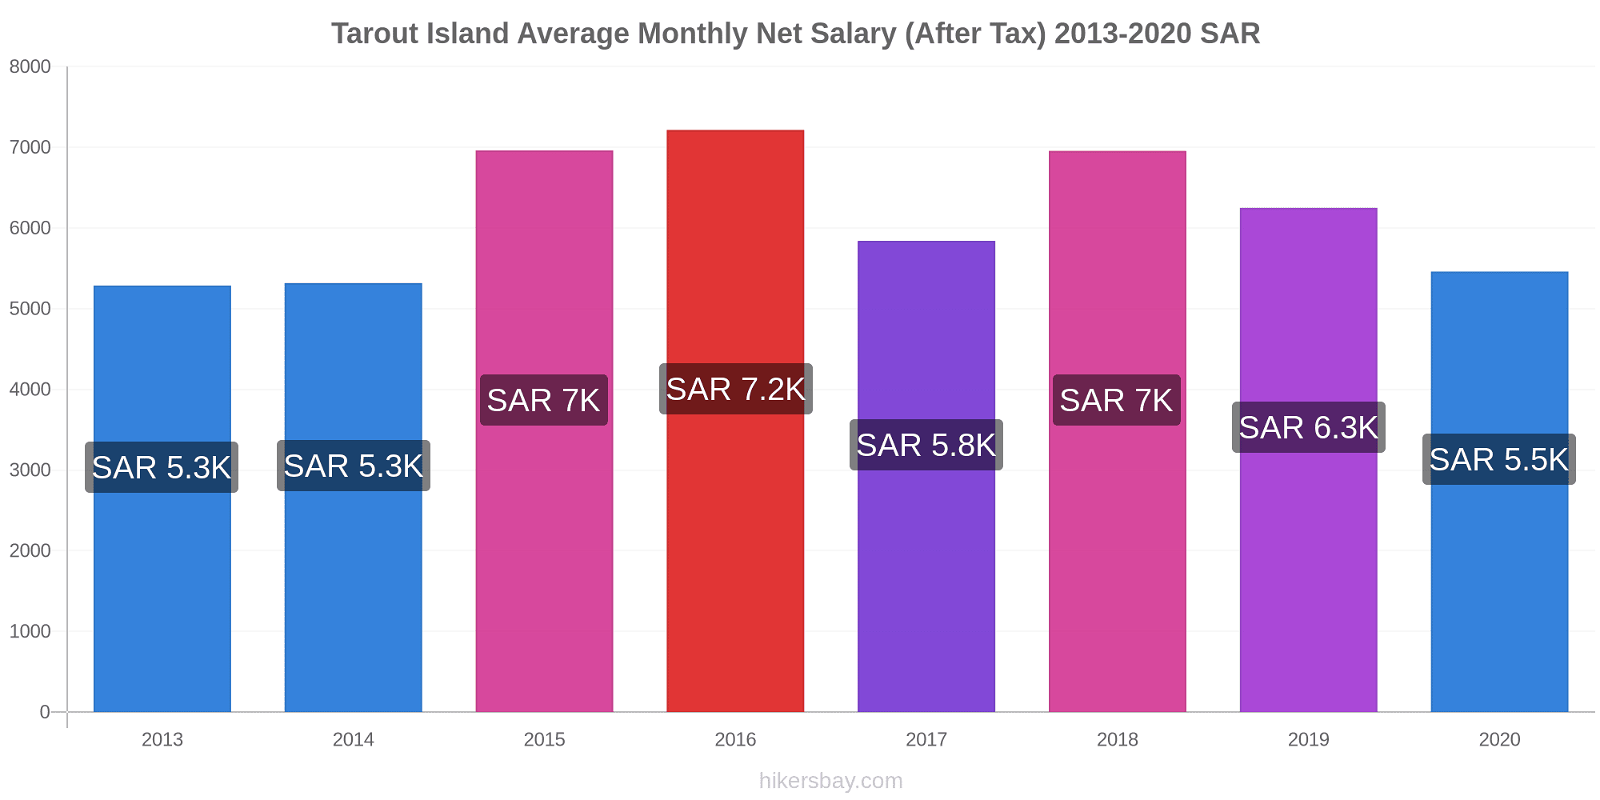 Tarout Island price changes Average Monthly Net Salary (After Tax) hikersbay.com